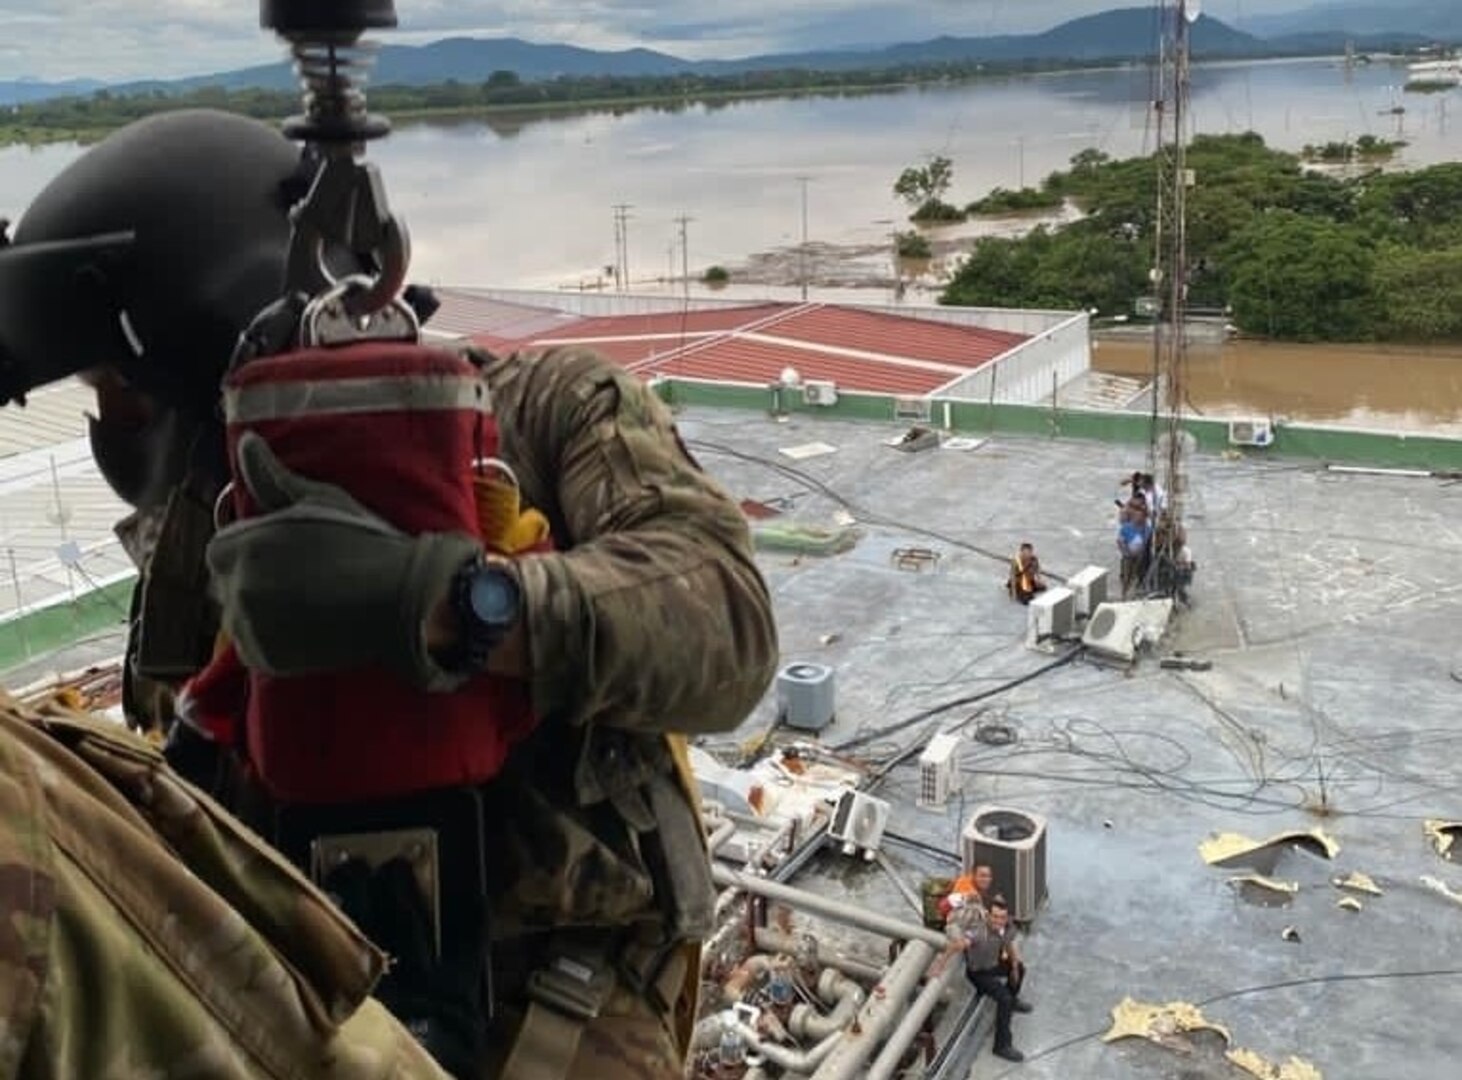 A U.S. HH-60 Black Hawk helicopter assigned to the 1-228th Aviation Regiment, Joint Task Force-Bravo rescued victims of Hurricane Eta stranded in floodwaters following the effects of Hurricane Eta in Honduras, Nov. 5, 2020.